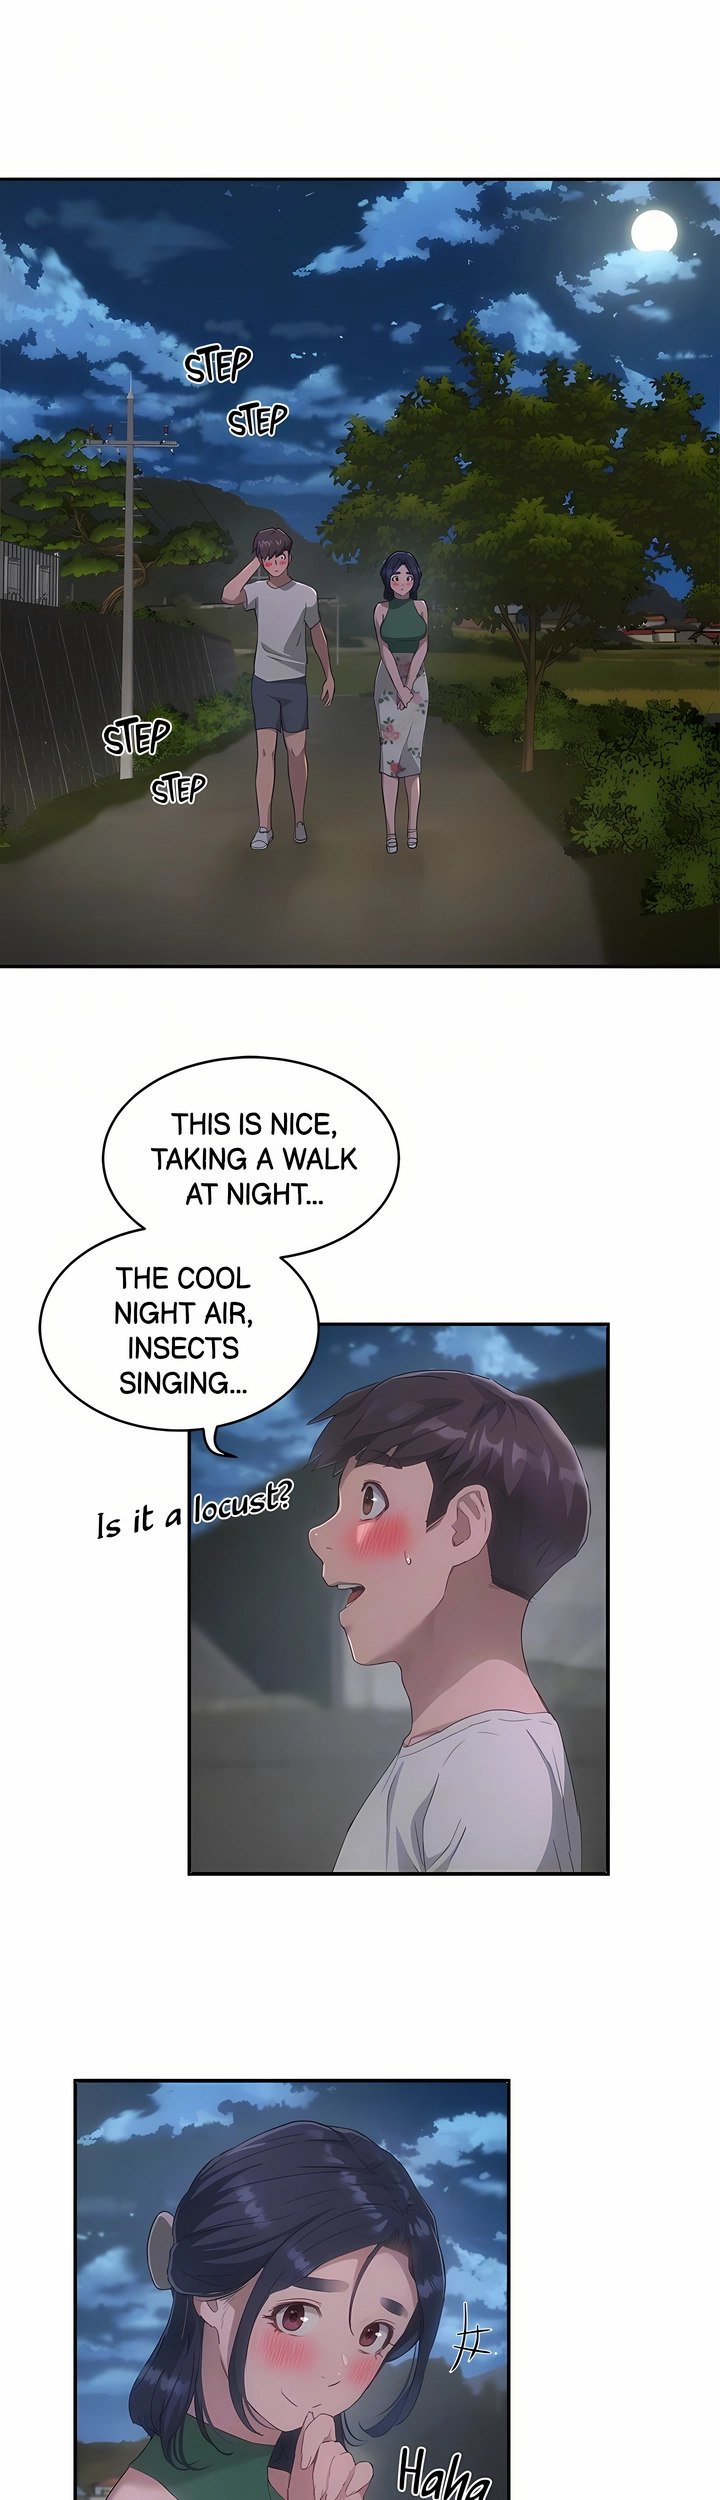 in-the-summer-chap-33-19